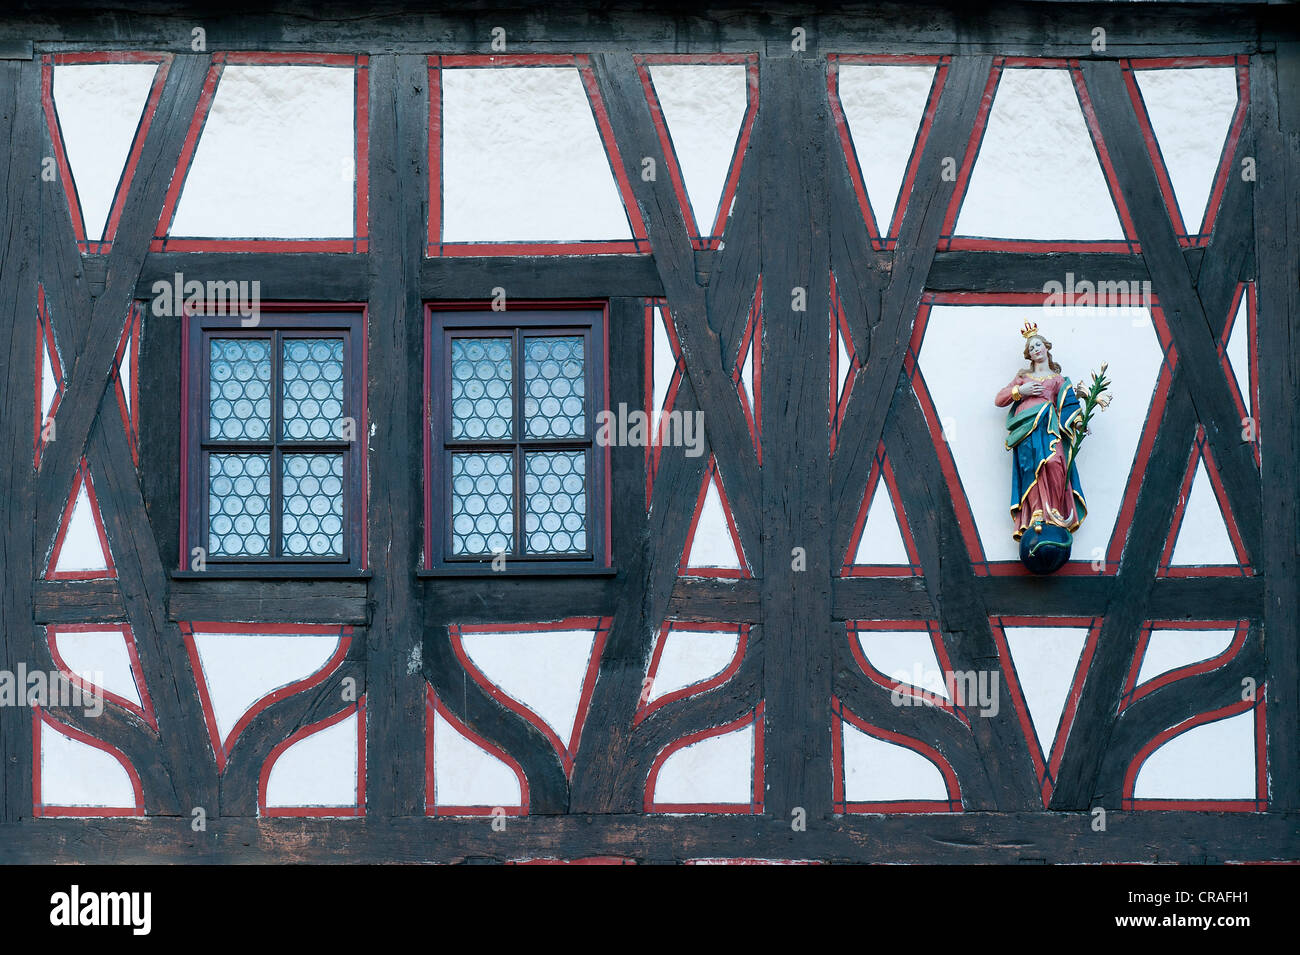 Historic half-timbered house, detail view, Fulda, Rhoen district, Hesse, Germany, Europe Stock Photo